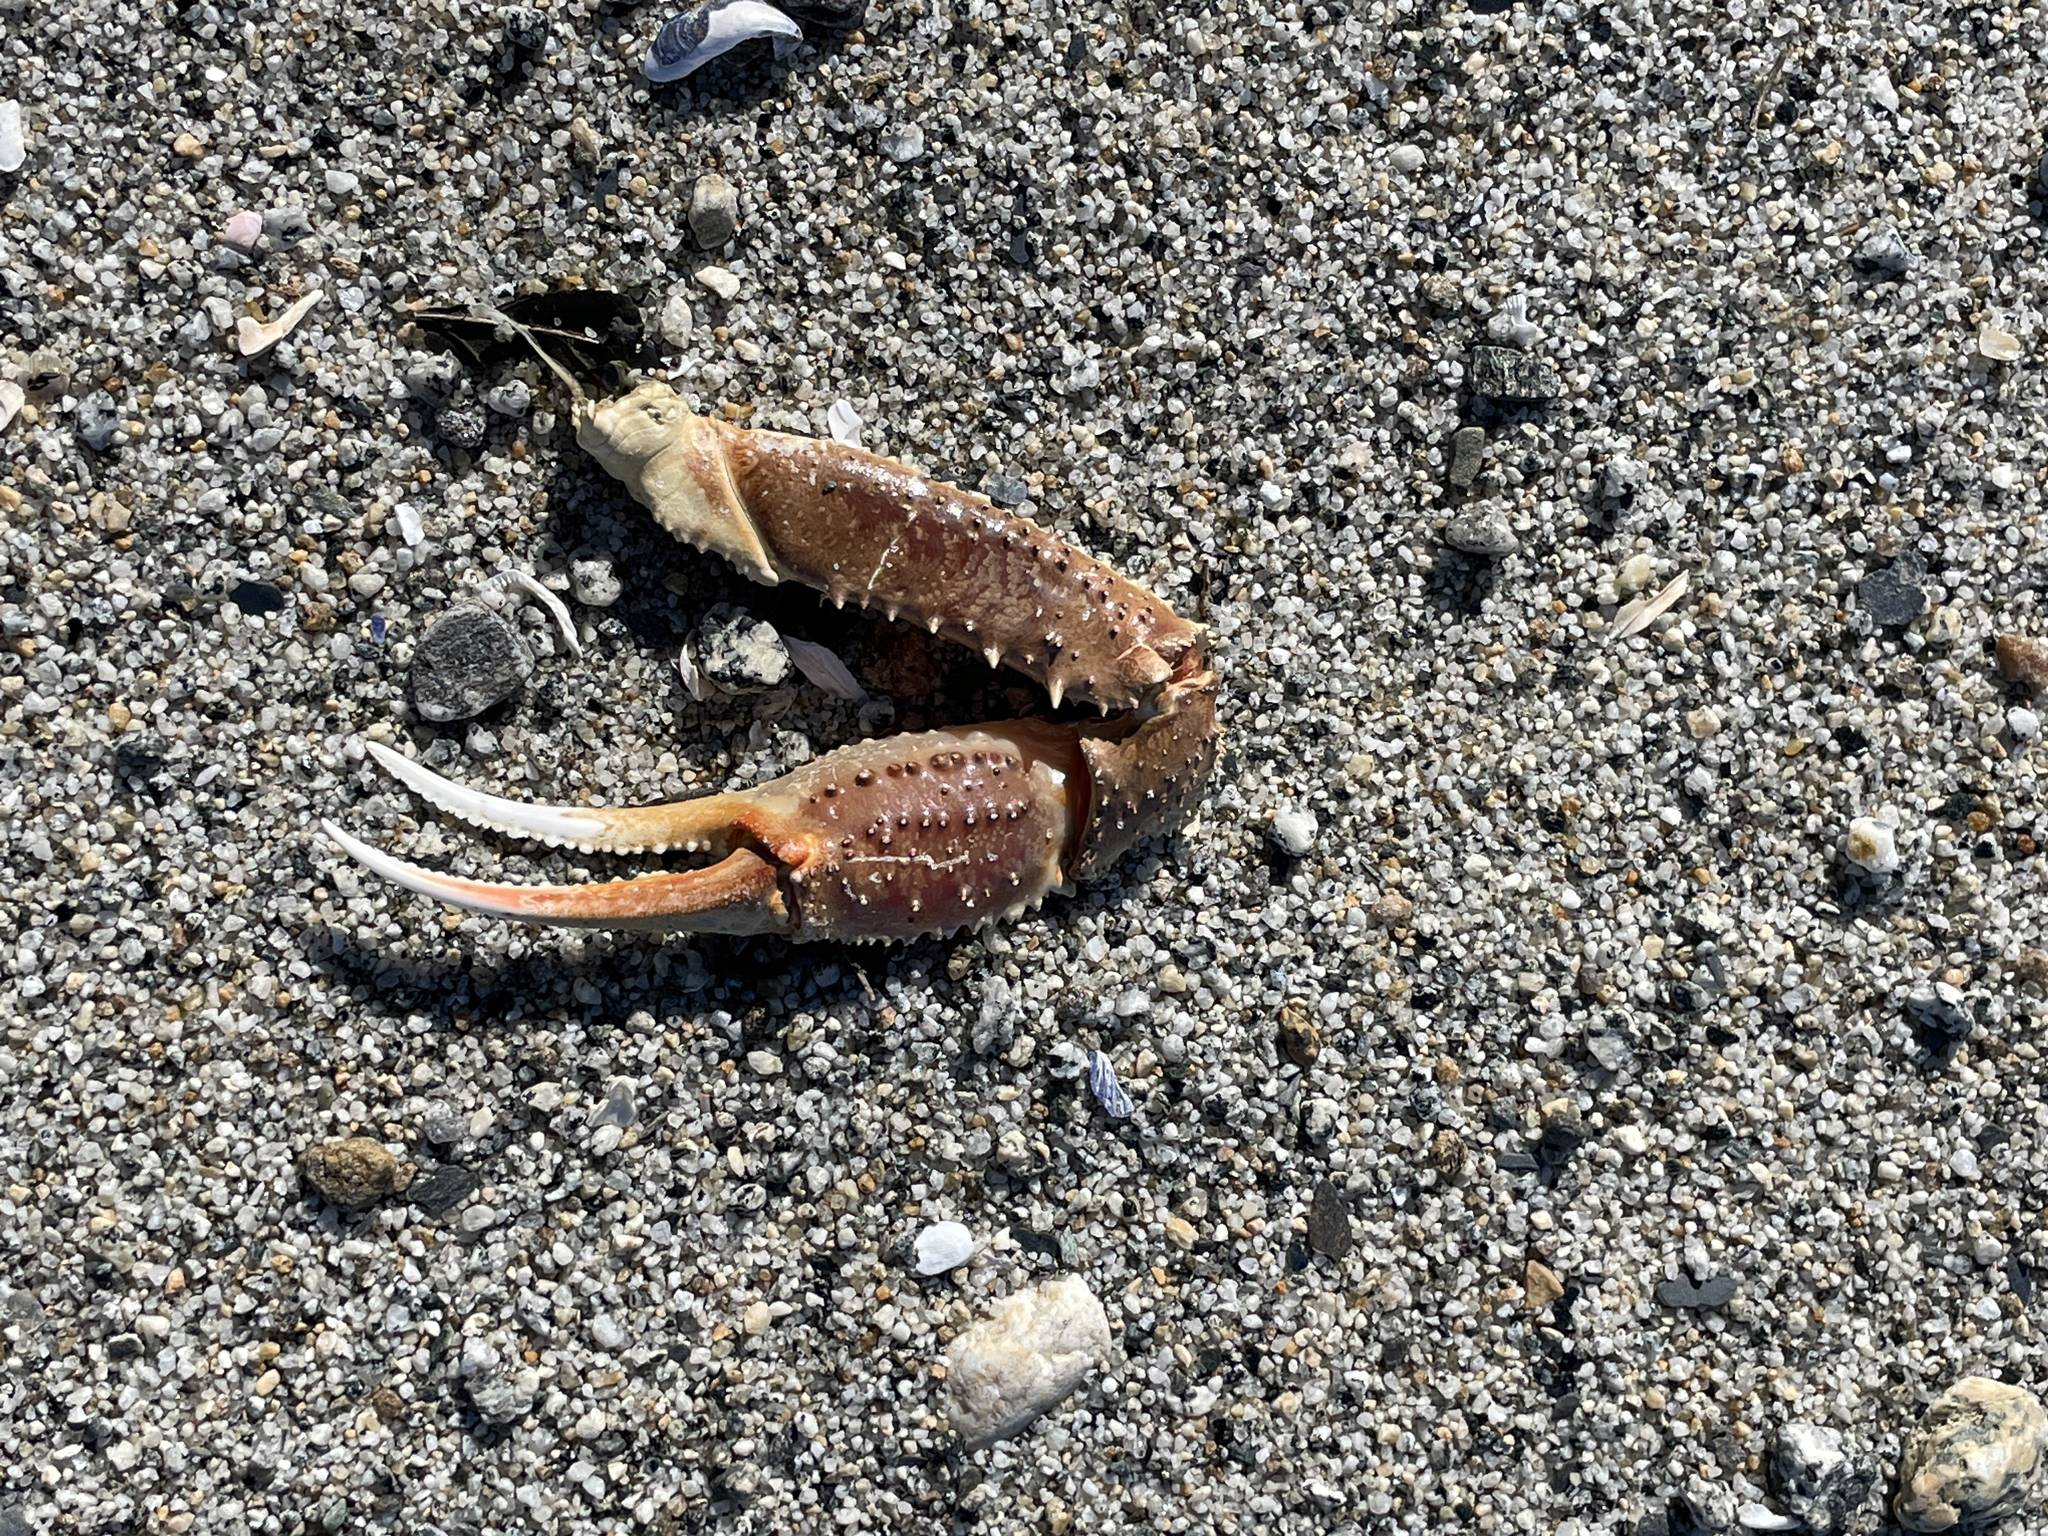 “Was this crab, or unlucky?” asks Deana Barajas. “I didn’t see the rest of its body nearby, so it’s possible it got away.” The photo was taken April 17 at Boy Scout Beach. (Courtesy Photo / Deana Barajas)